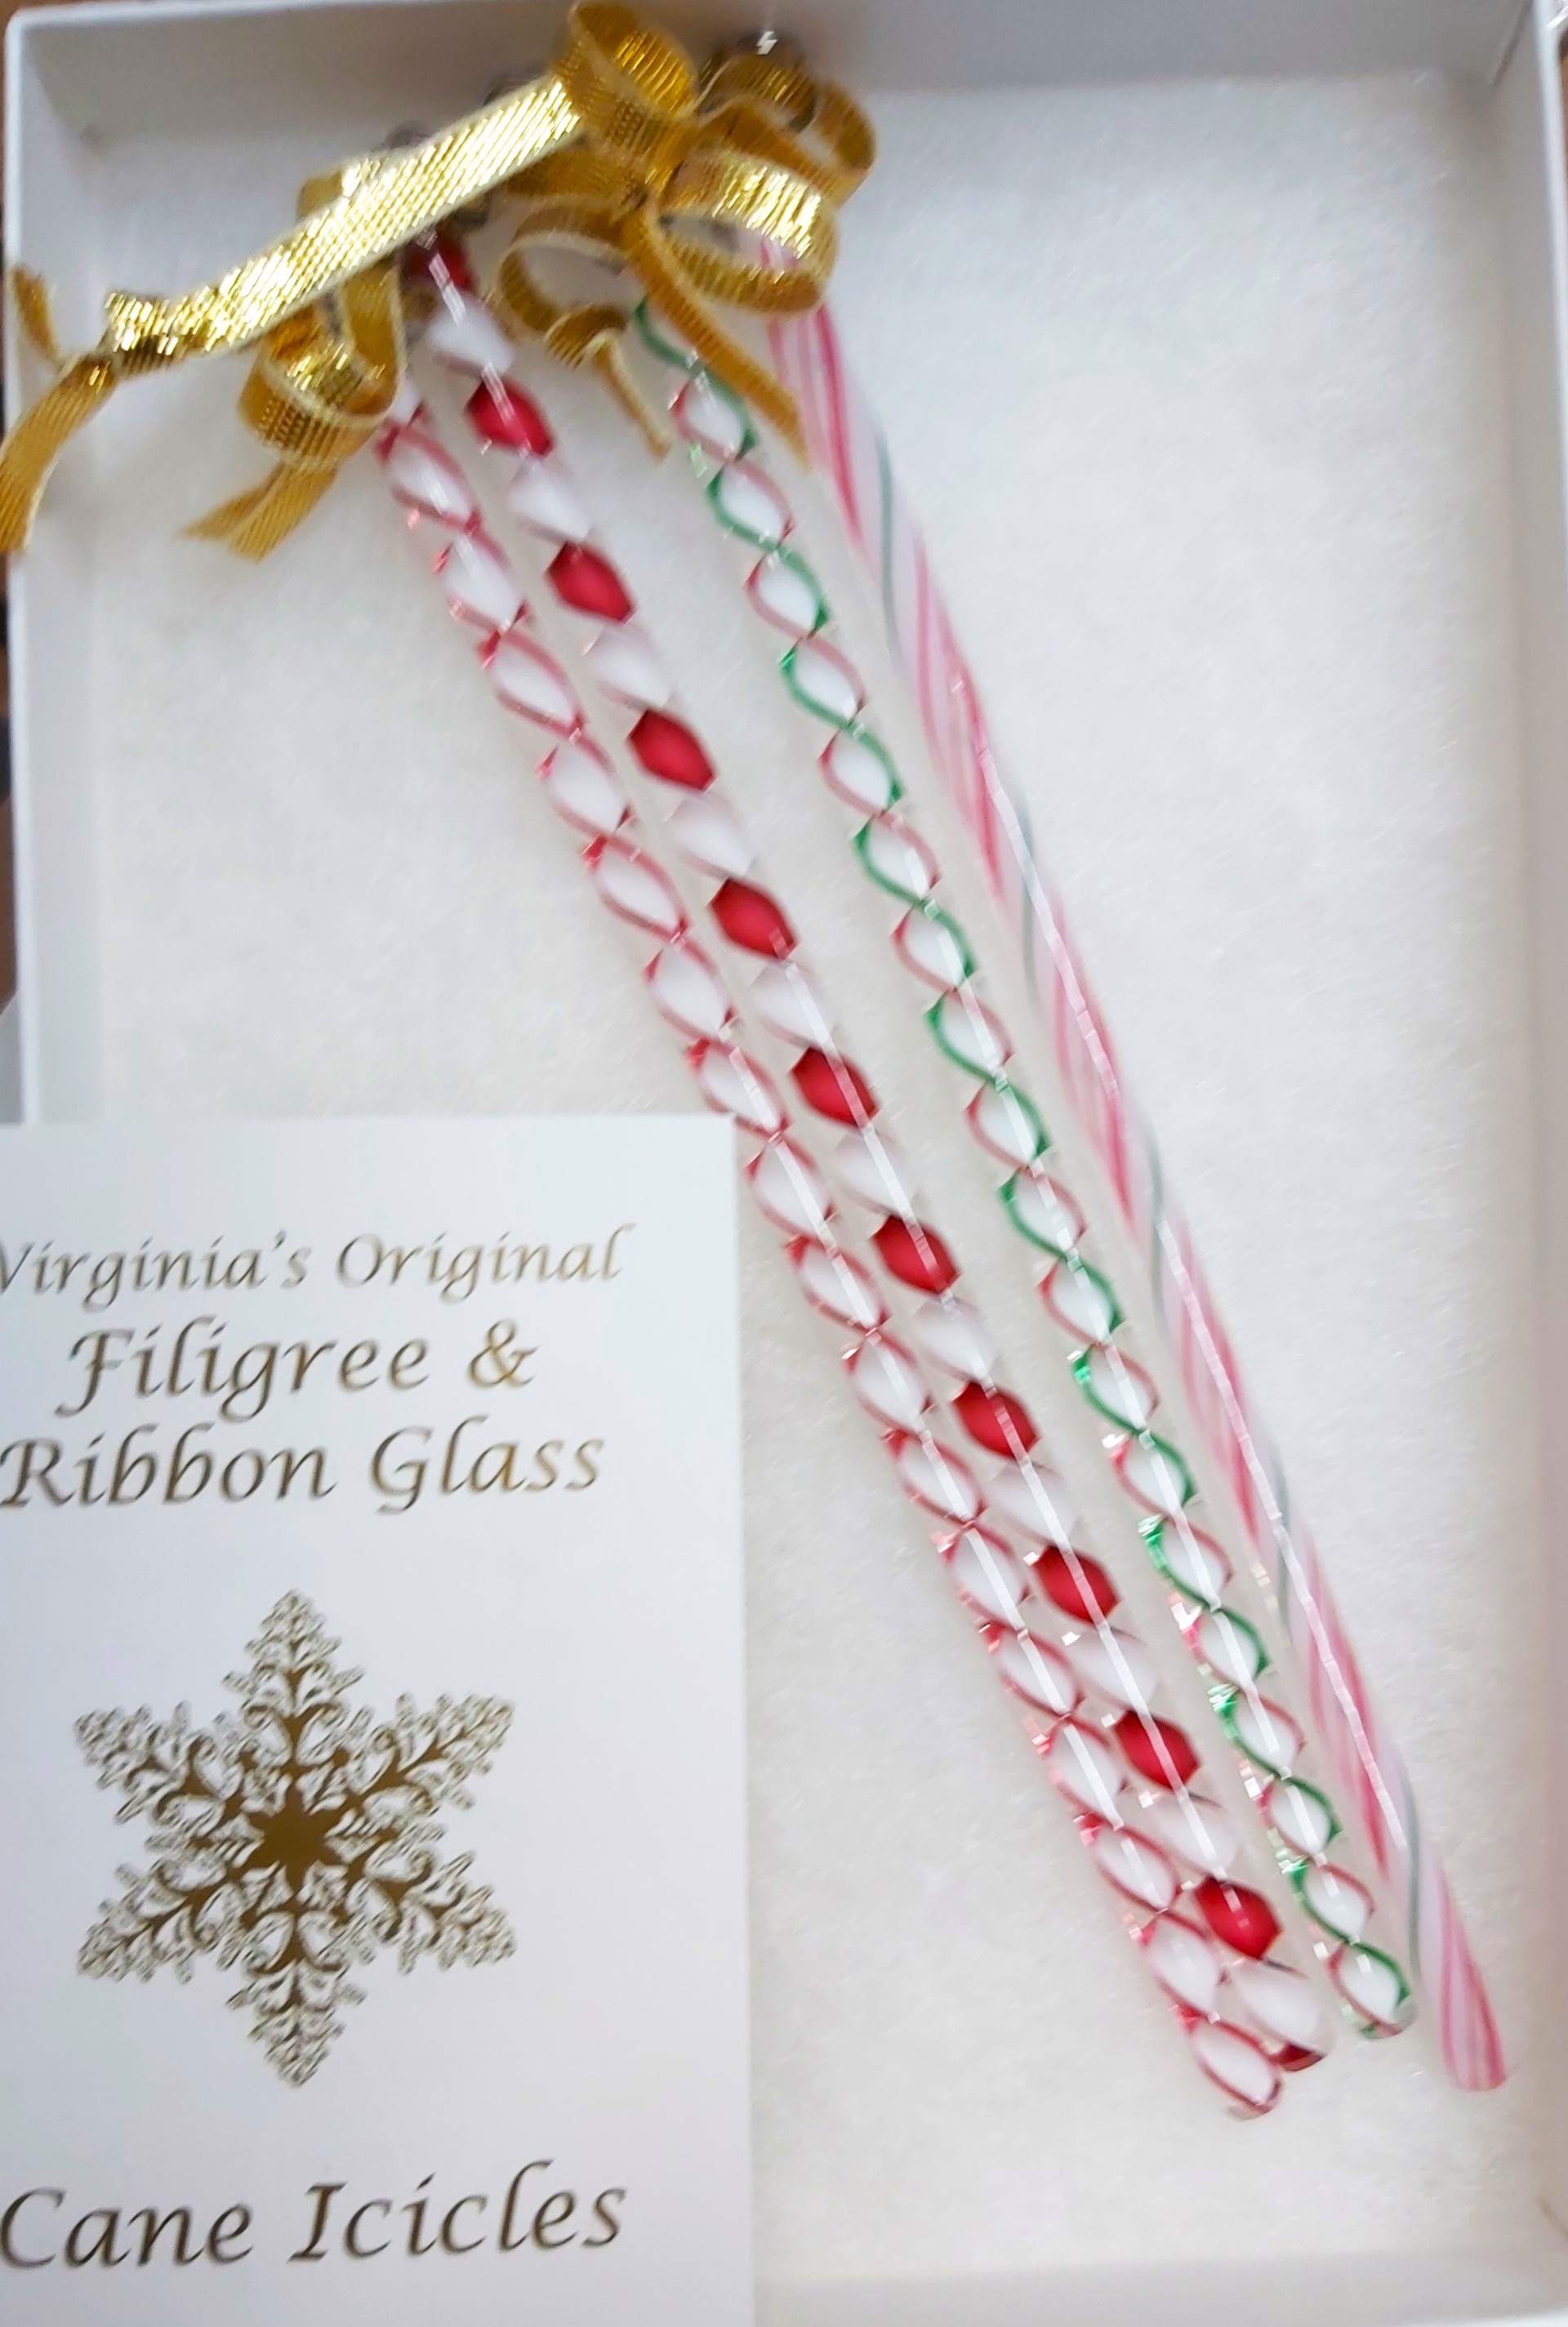 Art Glass Icicles Filigree/Ribbon - CHRISTMAS MIX - (boxed set of 4) 202983 by Virginia Wilson Toccalino